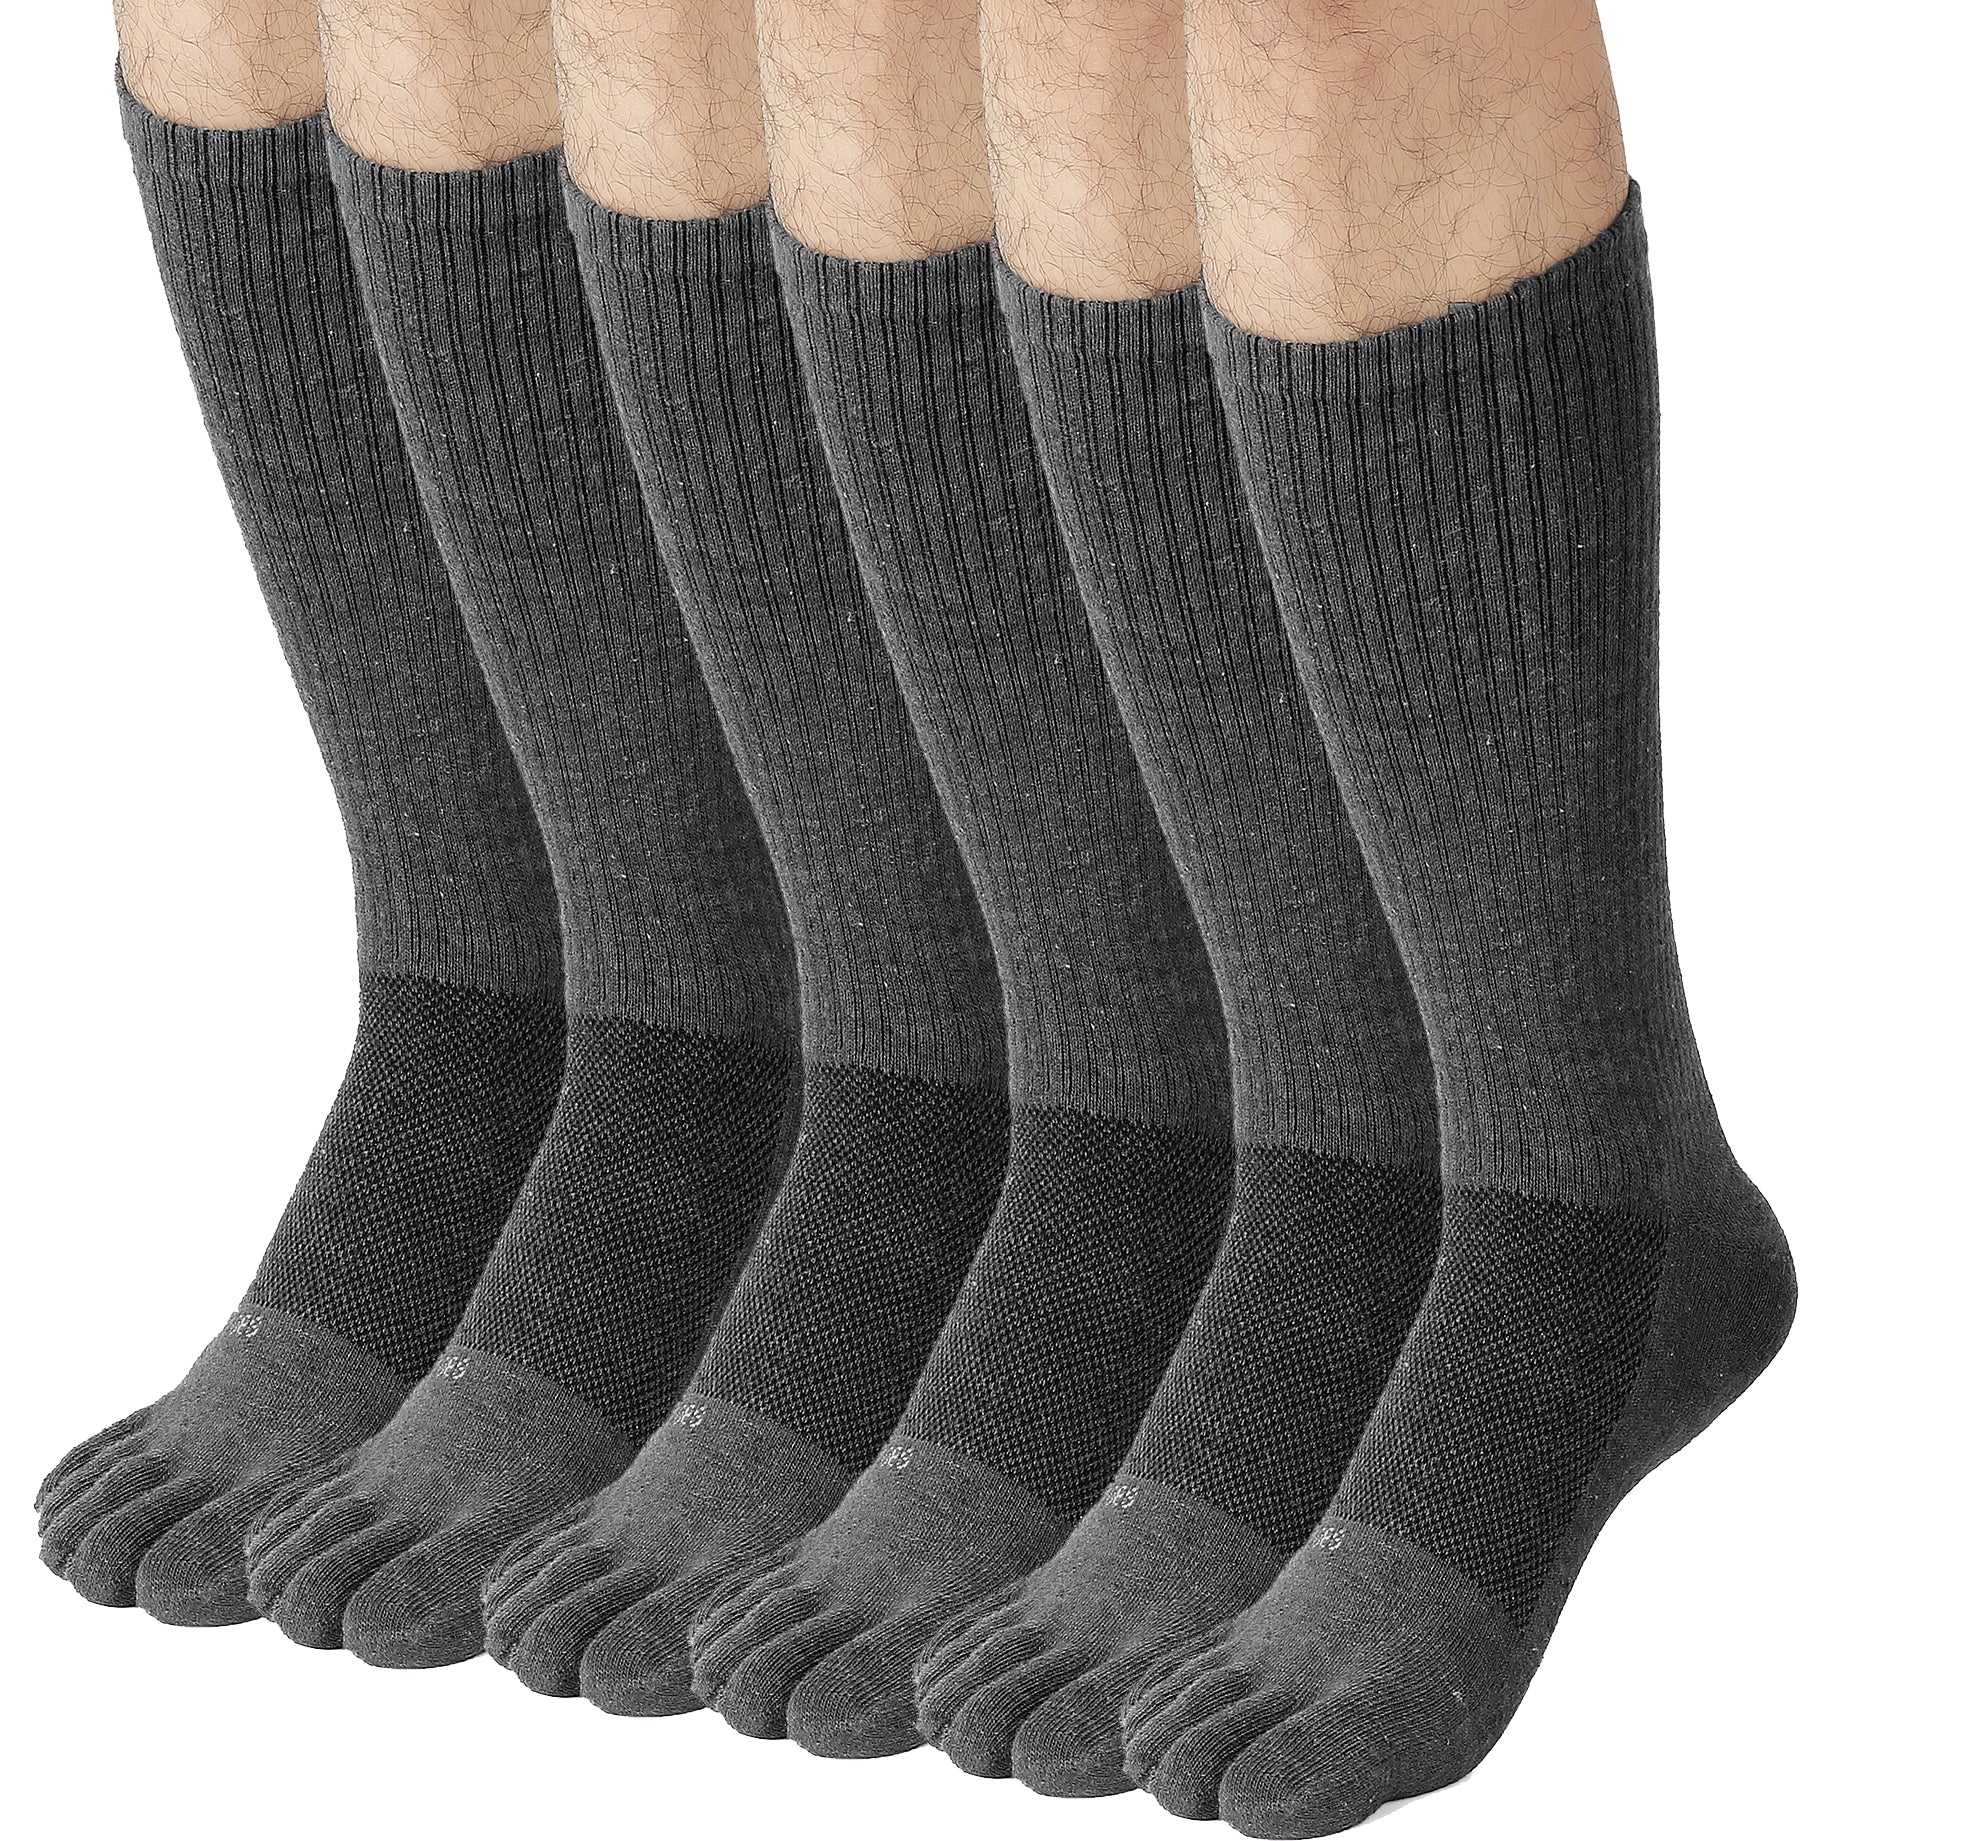  FUN TOES Men's Hiking Crew Merino Wool Socks 6 Pairs  Lightweight, Reinforced Size 8-12 (2 Black, 2 Blue, 2 Brown) : Clothing,  Shoes & Jewelry